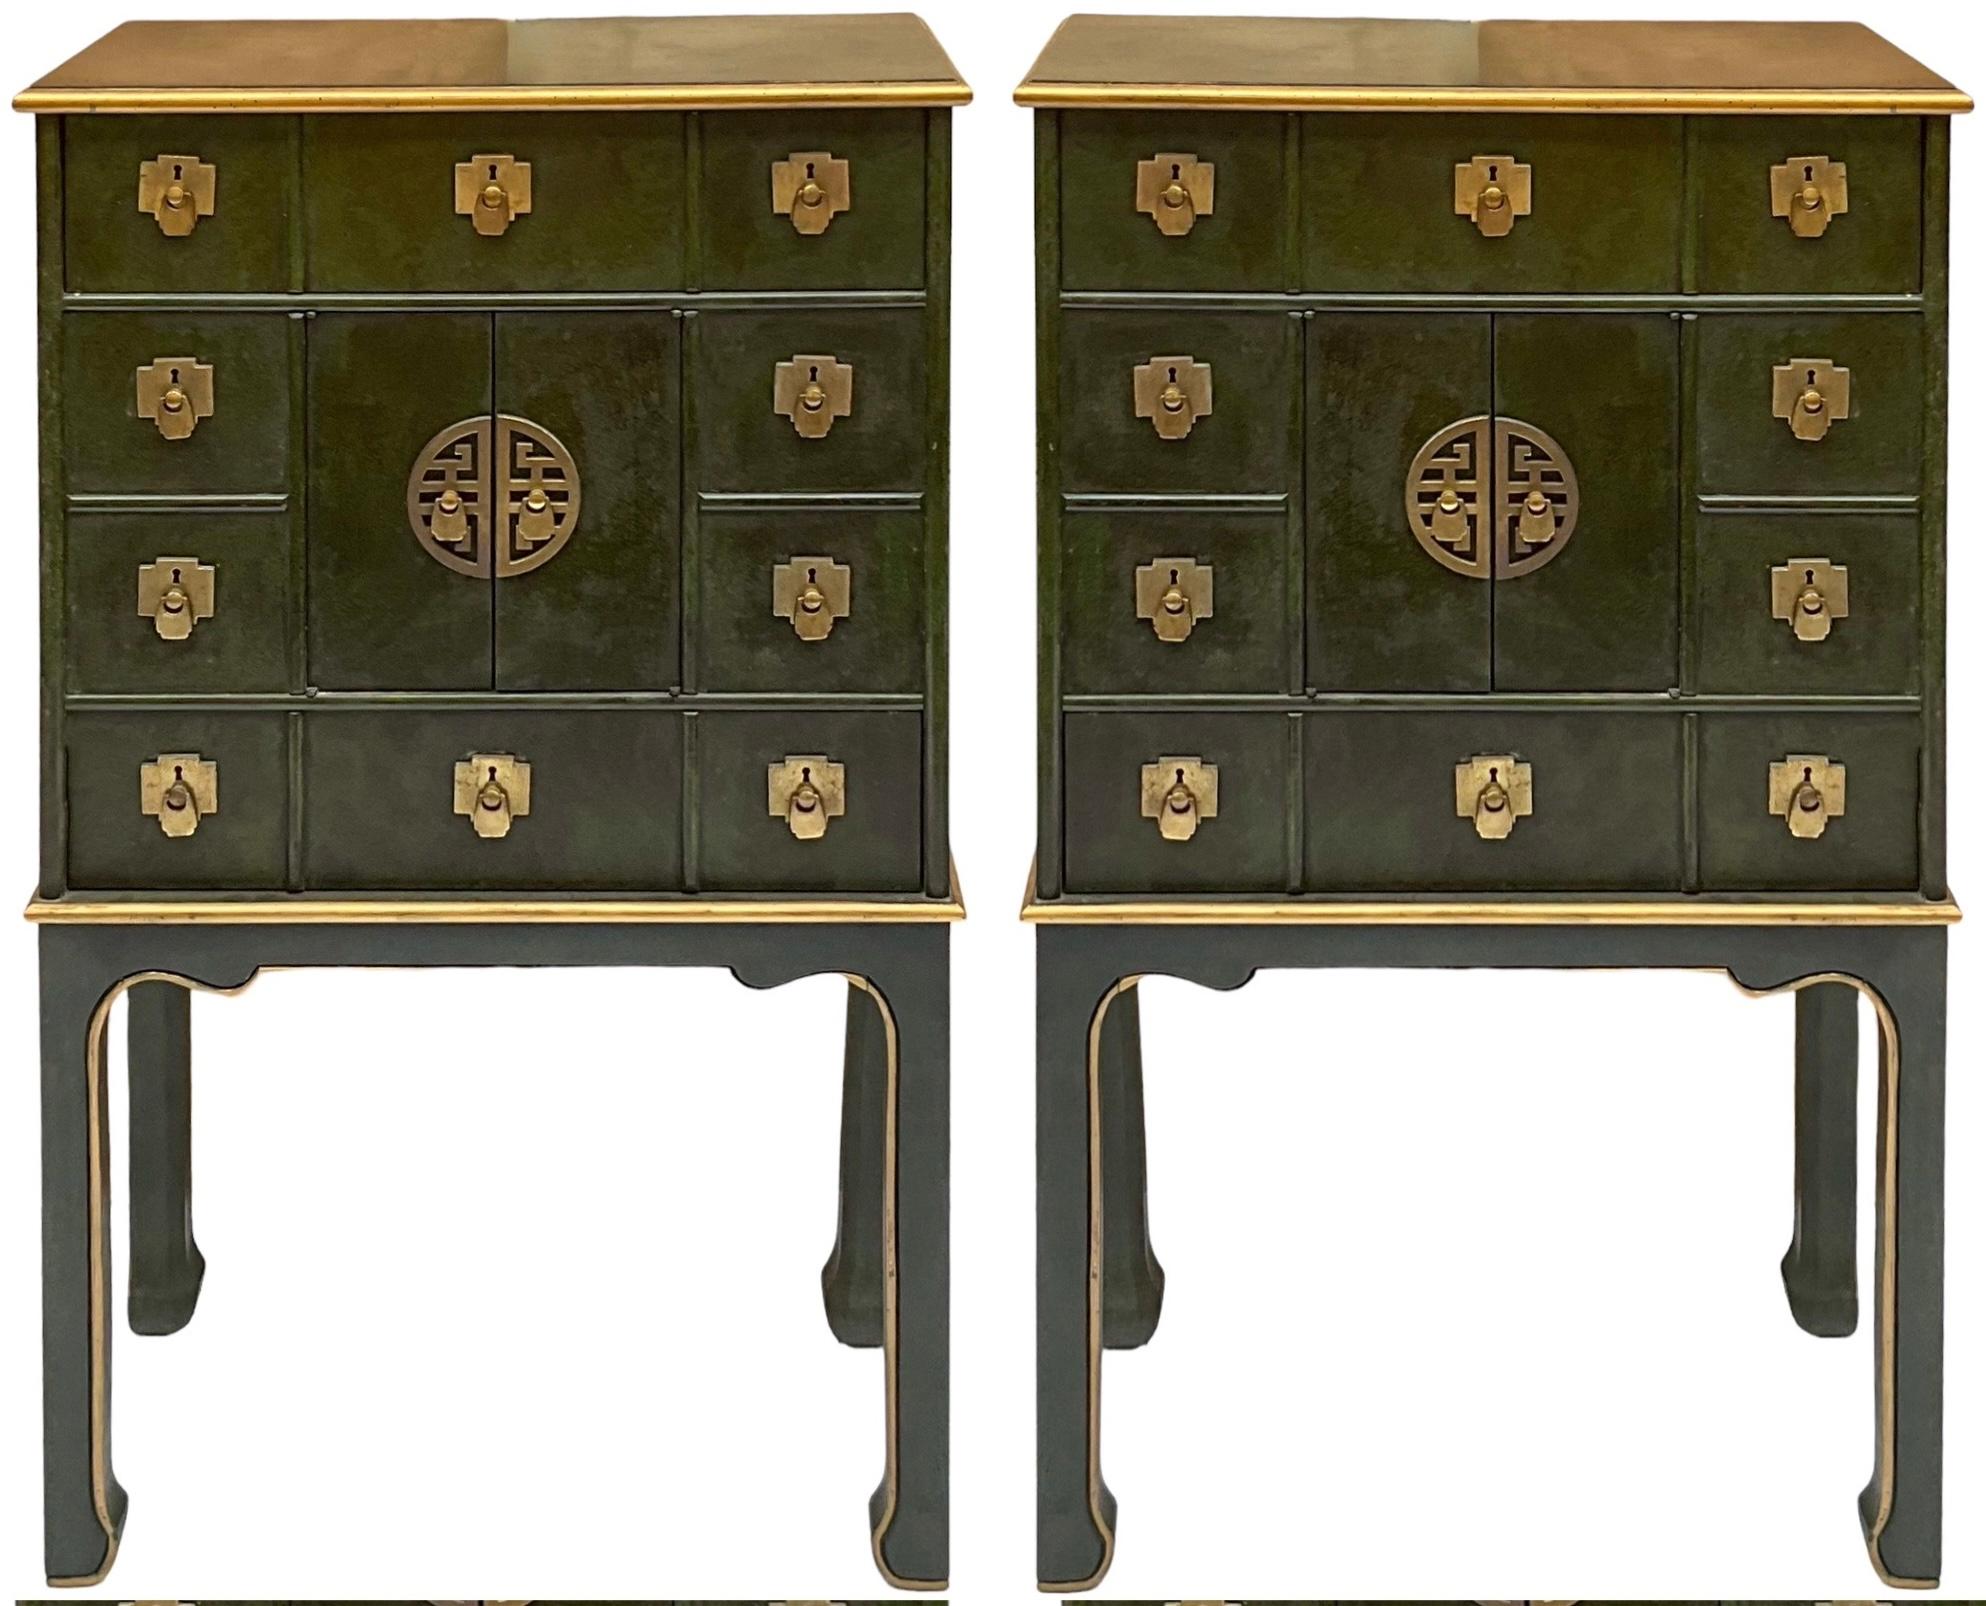 Brass Mid-Century Chinese Ming Style Lingerie / Storage / Jewelry Cabinets - Pair